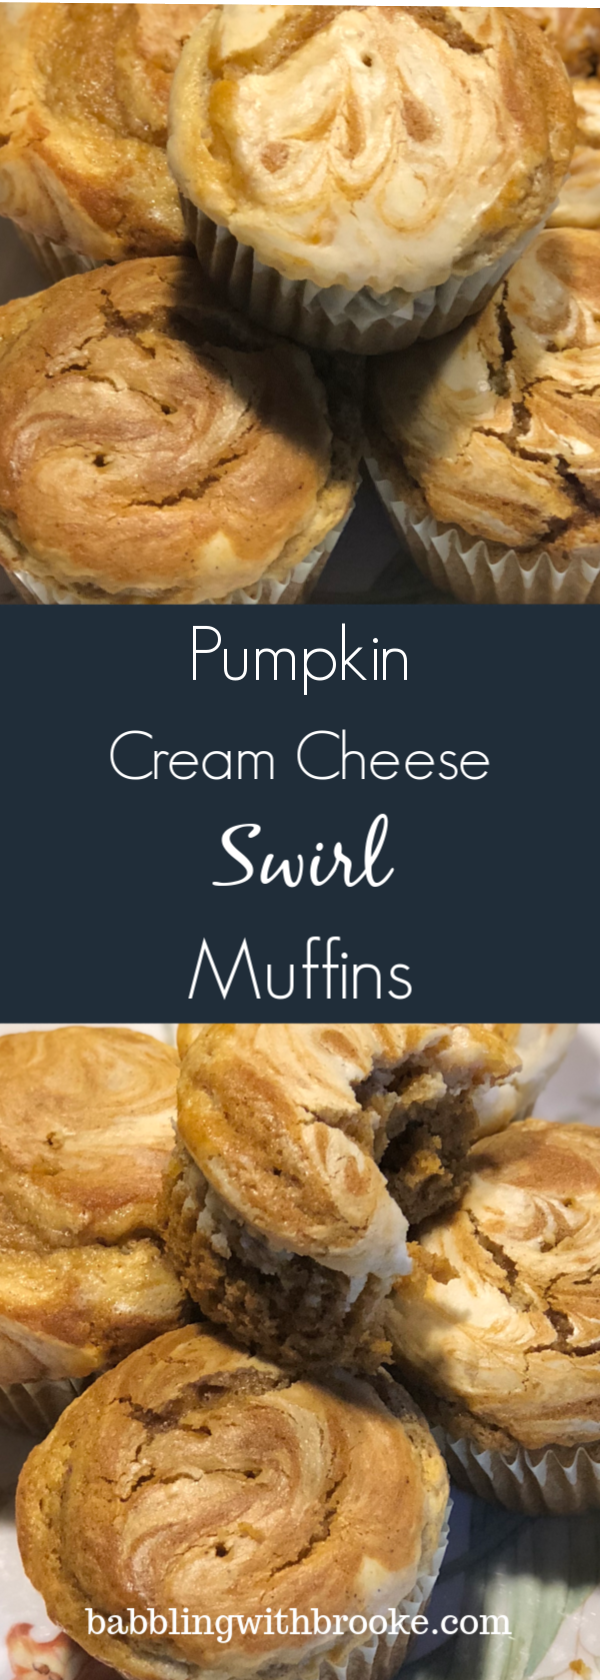 These delicious Fall muffins are perfect for cool weather. The pumpkin cream cheese swirl muffins have just the right amount of pumpkin and cream cheese. They are so easy to make too! #pumpkinmuffins #muffinrecipe #fallmuffins #easybreakfast